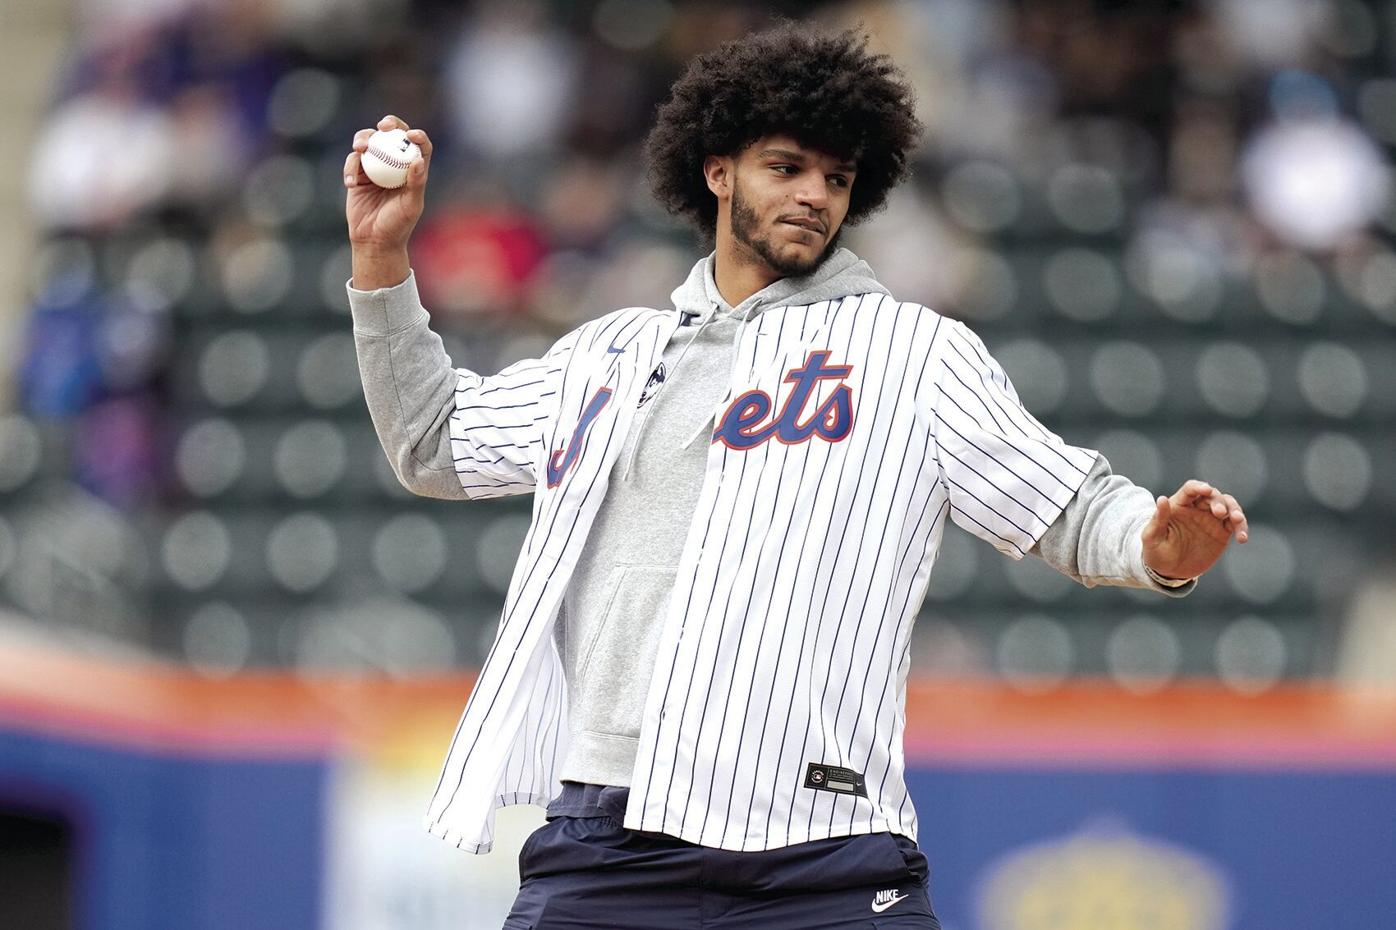 Jackson, Hurley celebrate UConn's title at Citi Field